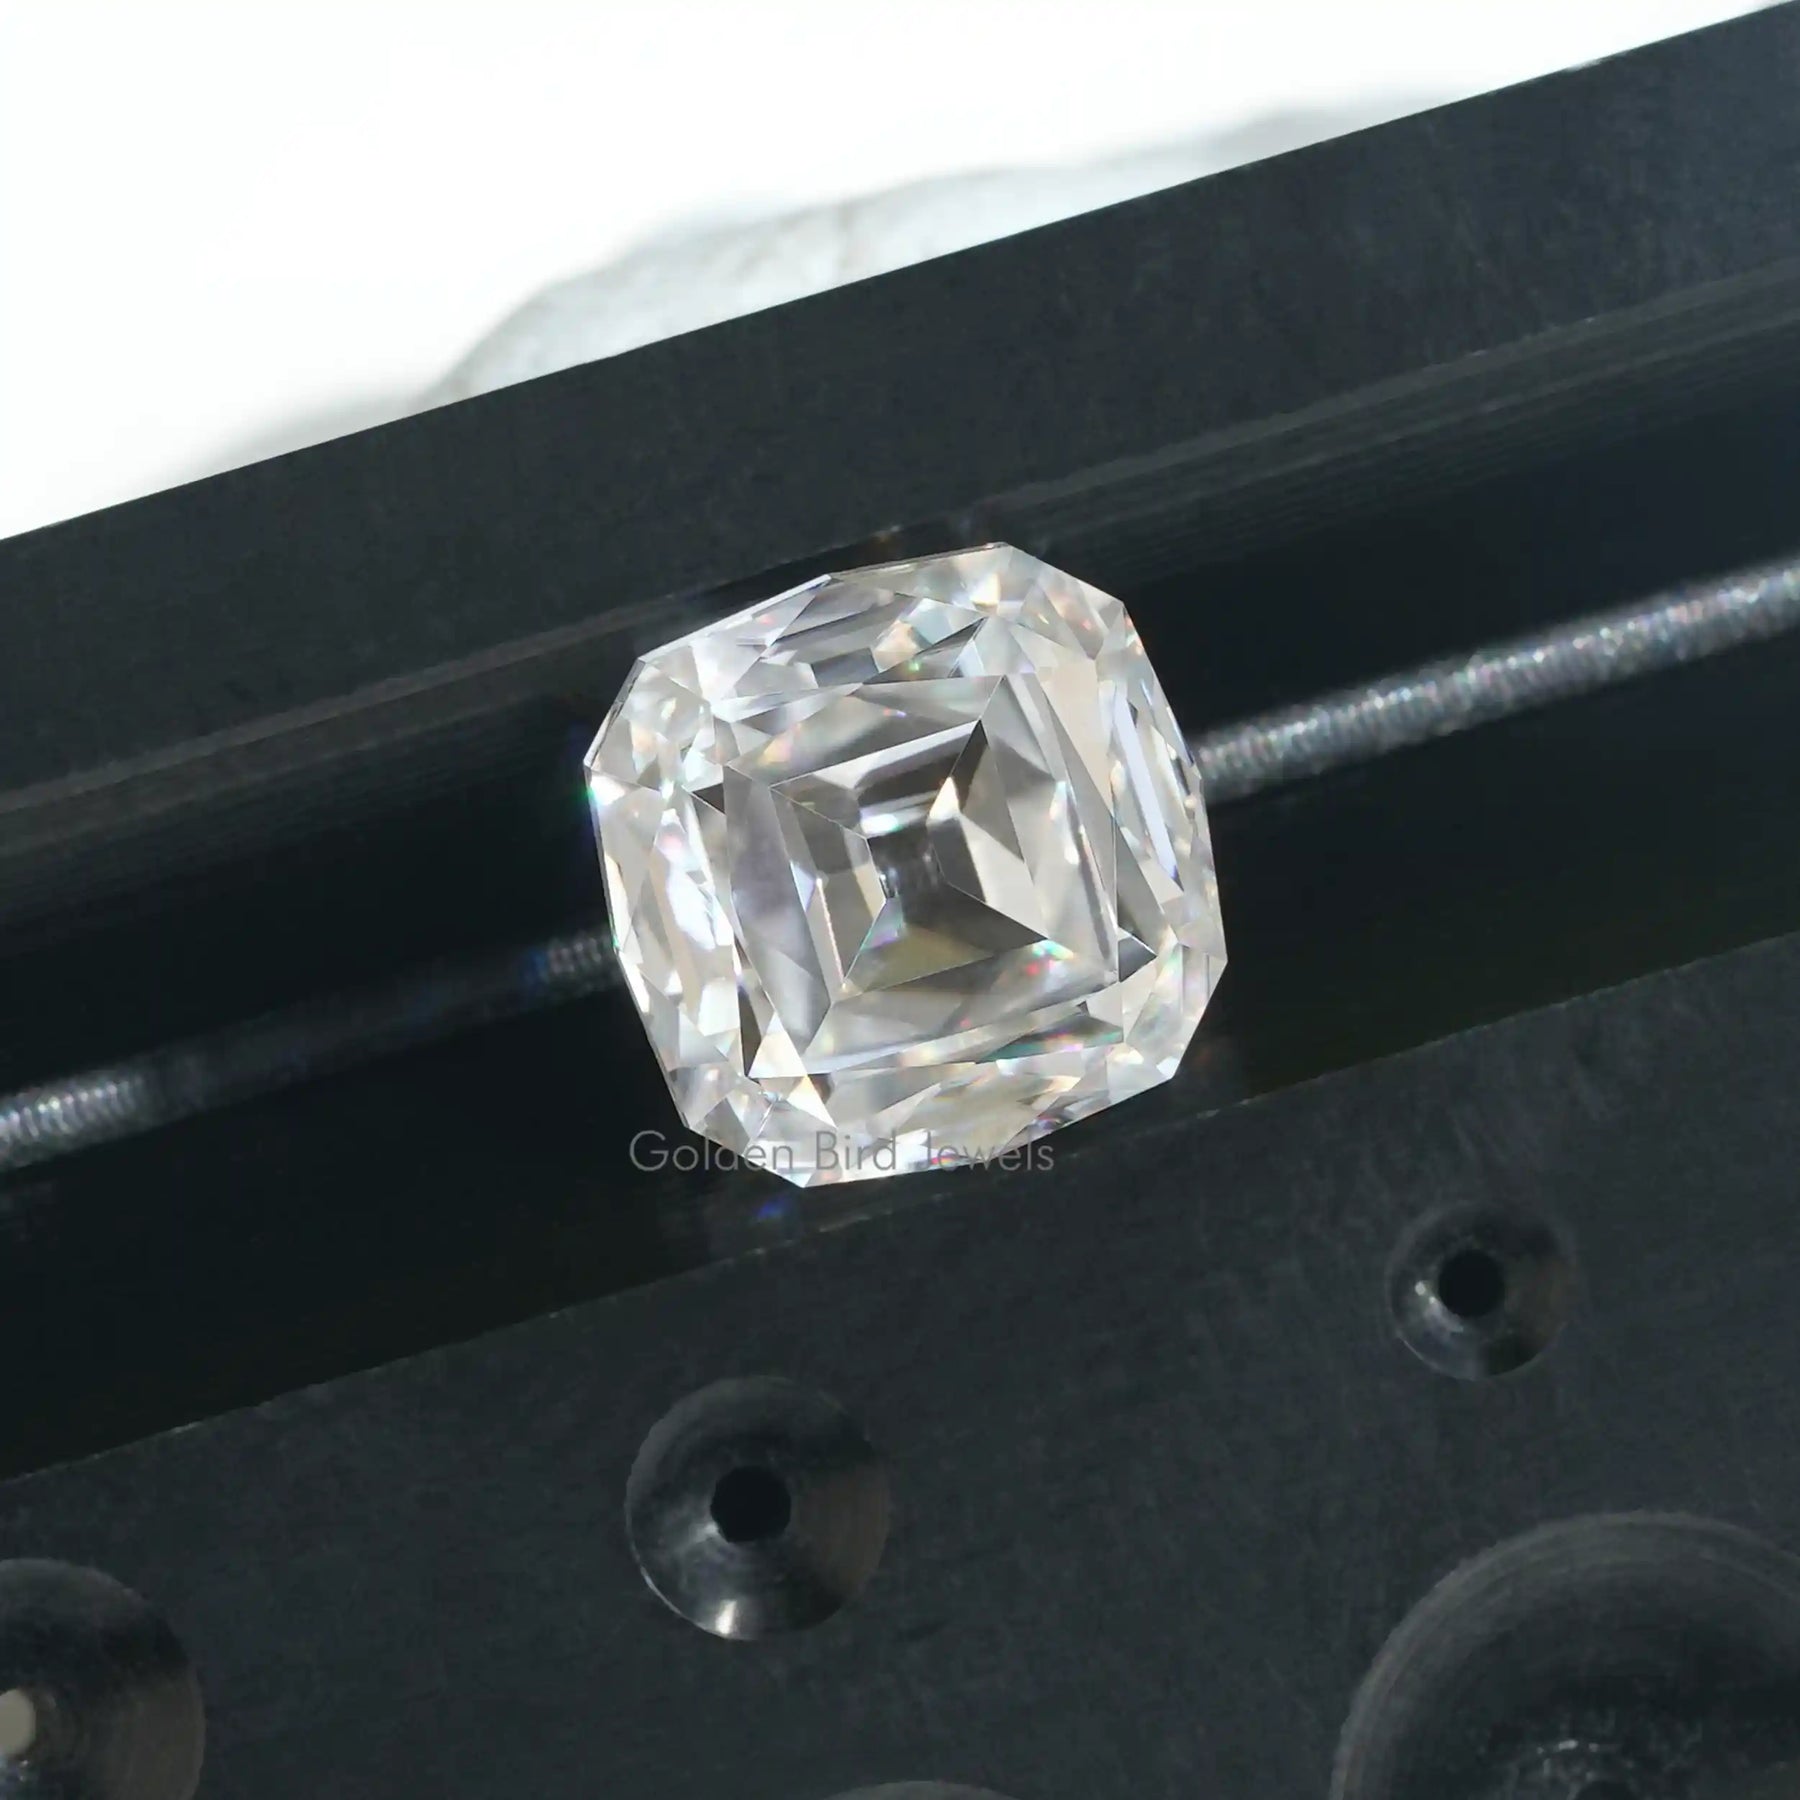 Excellent Front View Of Mazarin Cut Moissanite